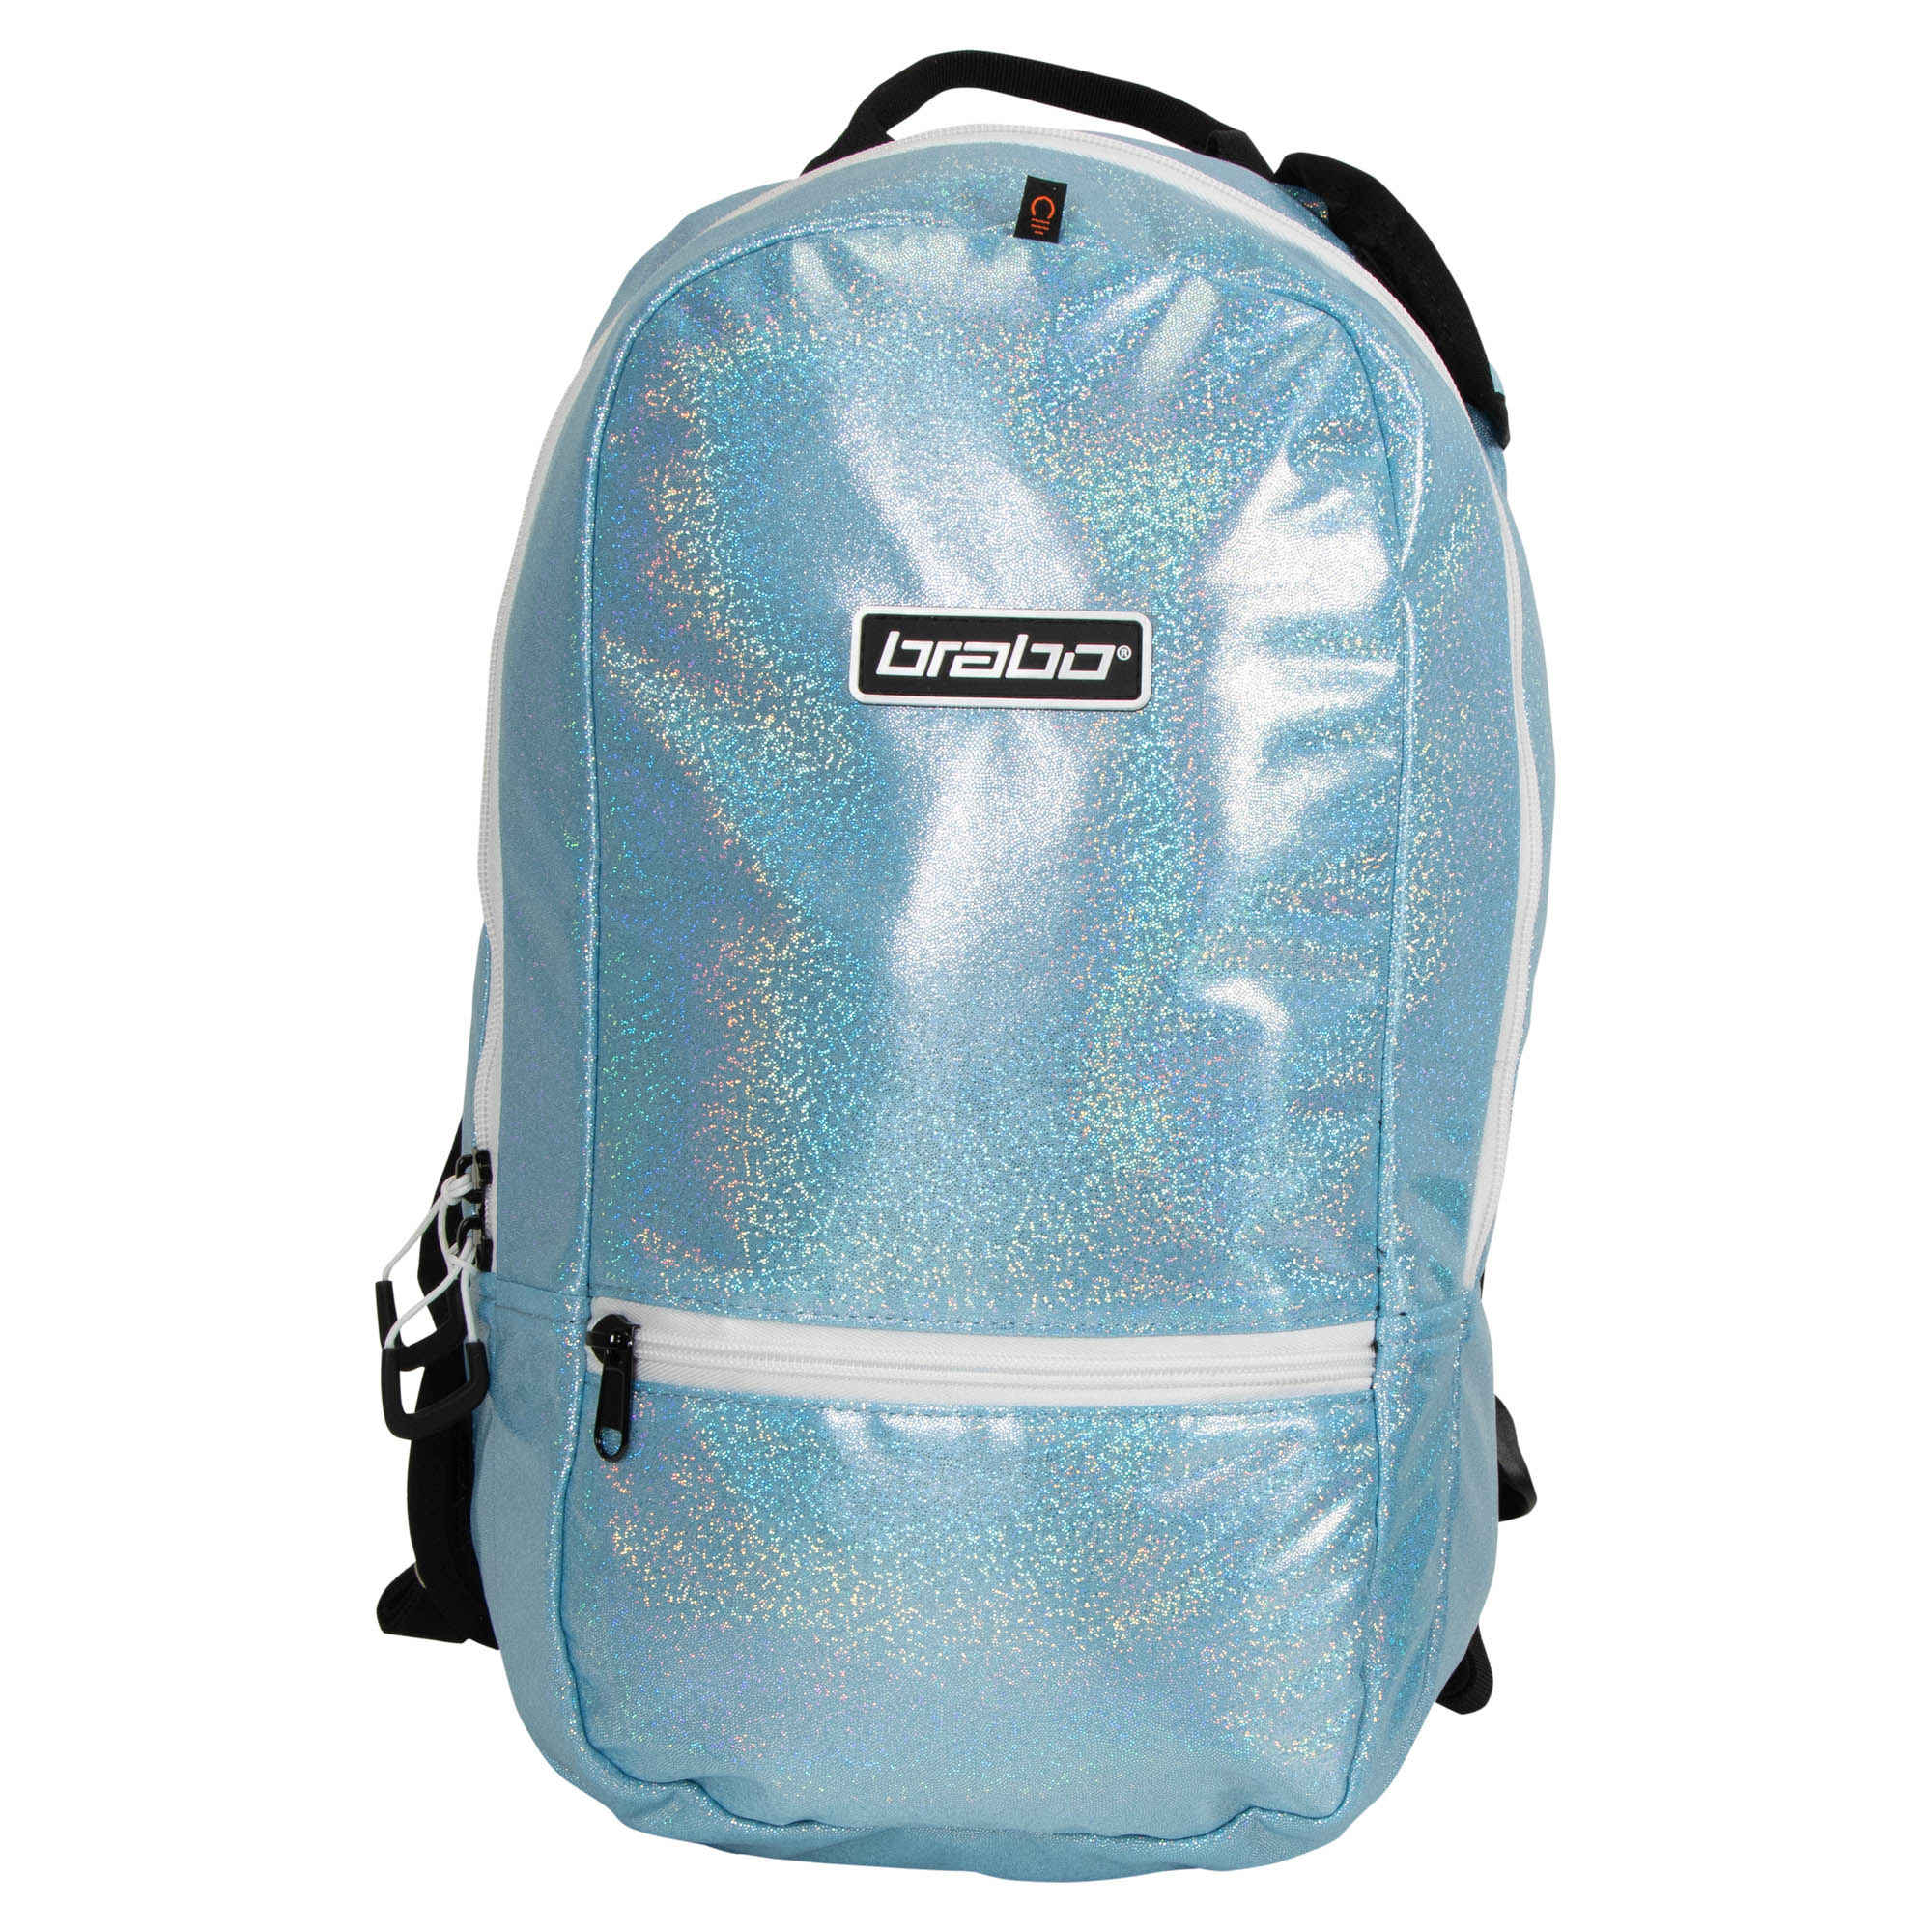 Backpack Fun Sparkle